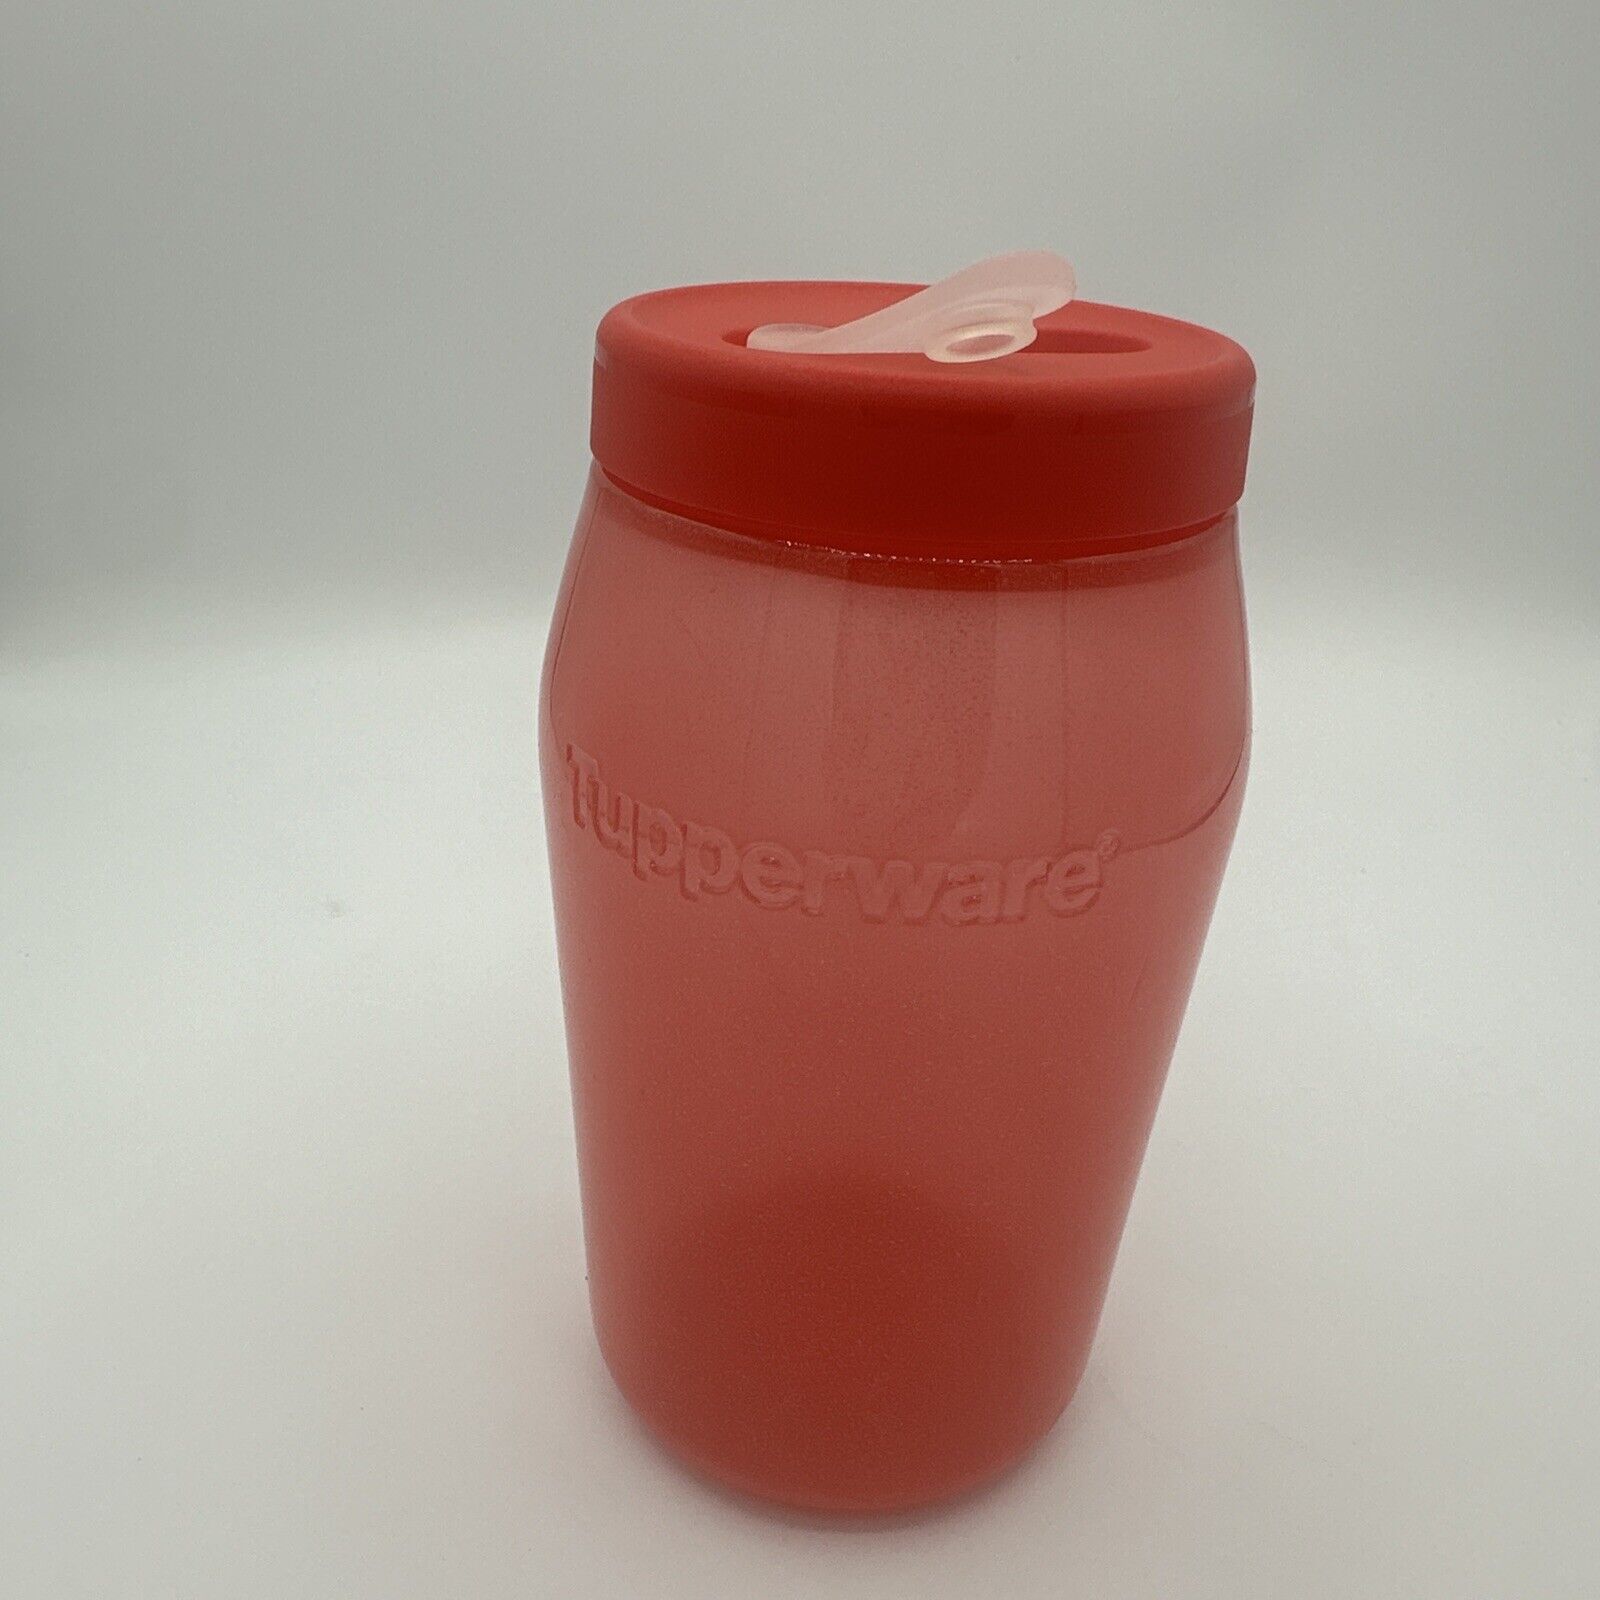 Tupperware Universal Jar Storage Container 925ml /3.25 cup Red Sparkle New 